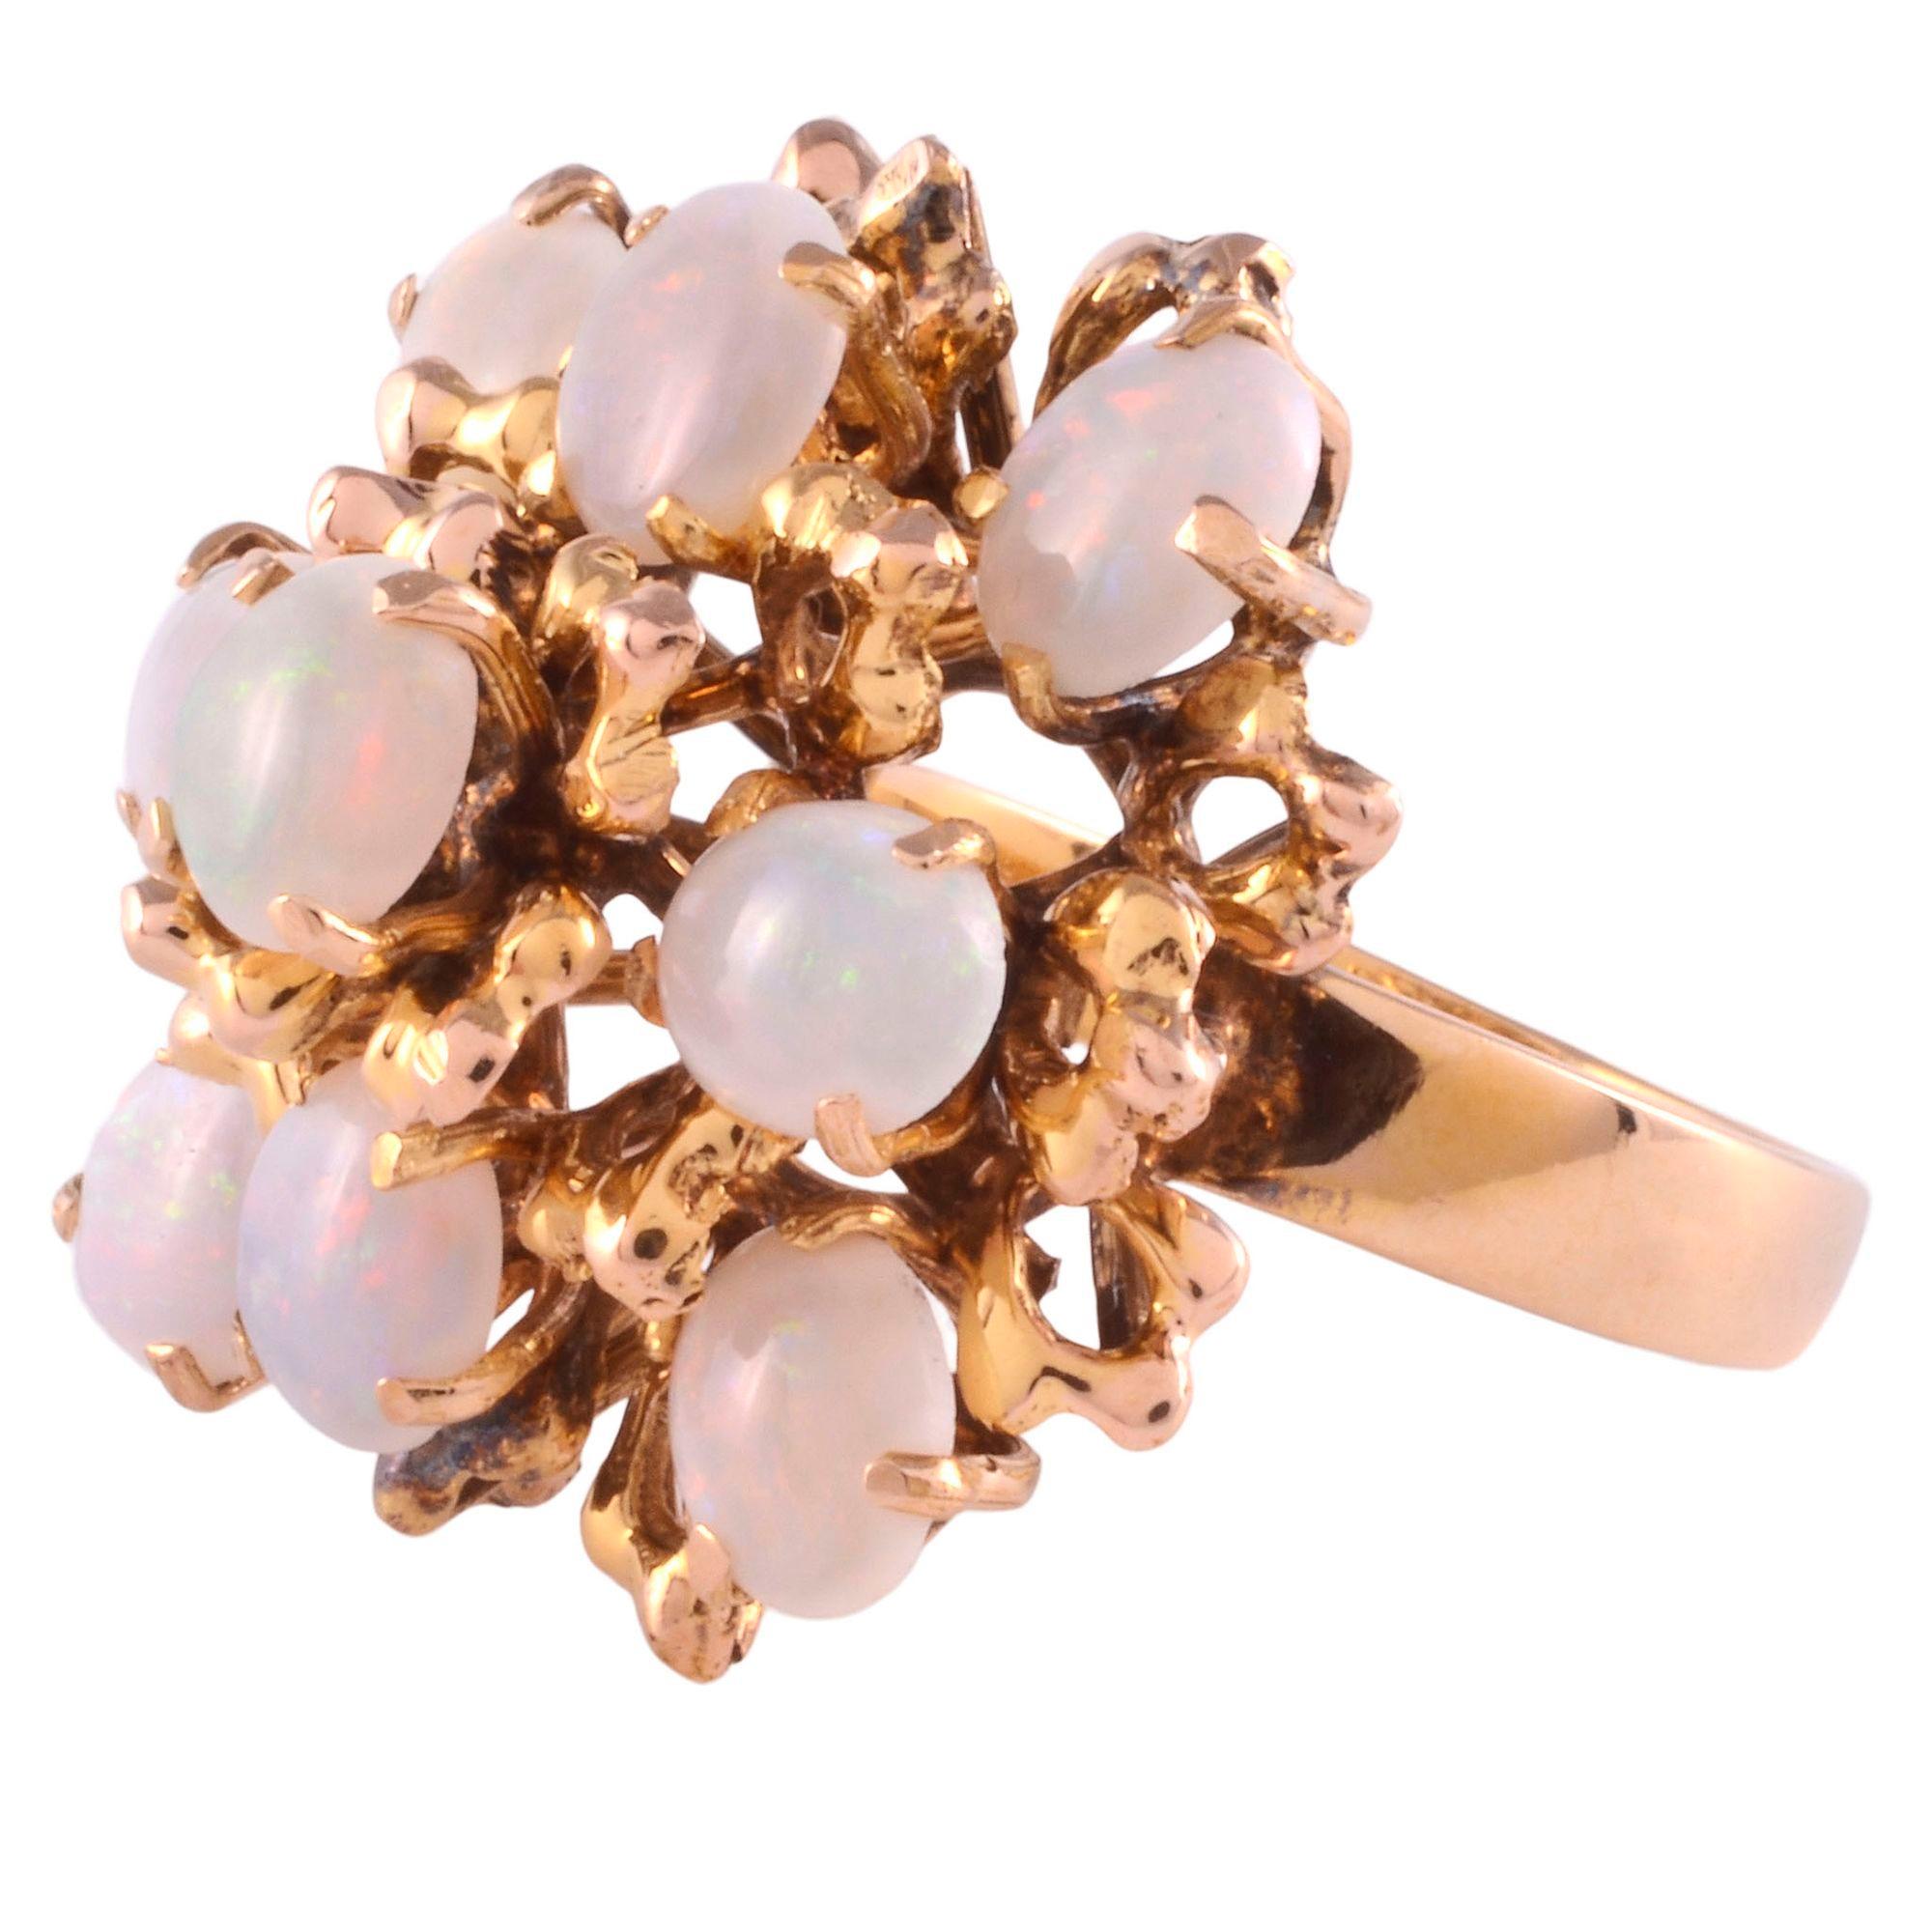 Vintage oval opal cocktail ring, circa 1950. This 12 karat yellow gold cocktail ring has nine oval opals. The vintage opal ring is a size 6.5. [SJ SAUC1167A P]

*Resizing available for additional charge.